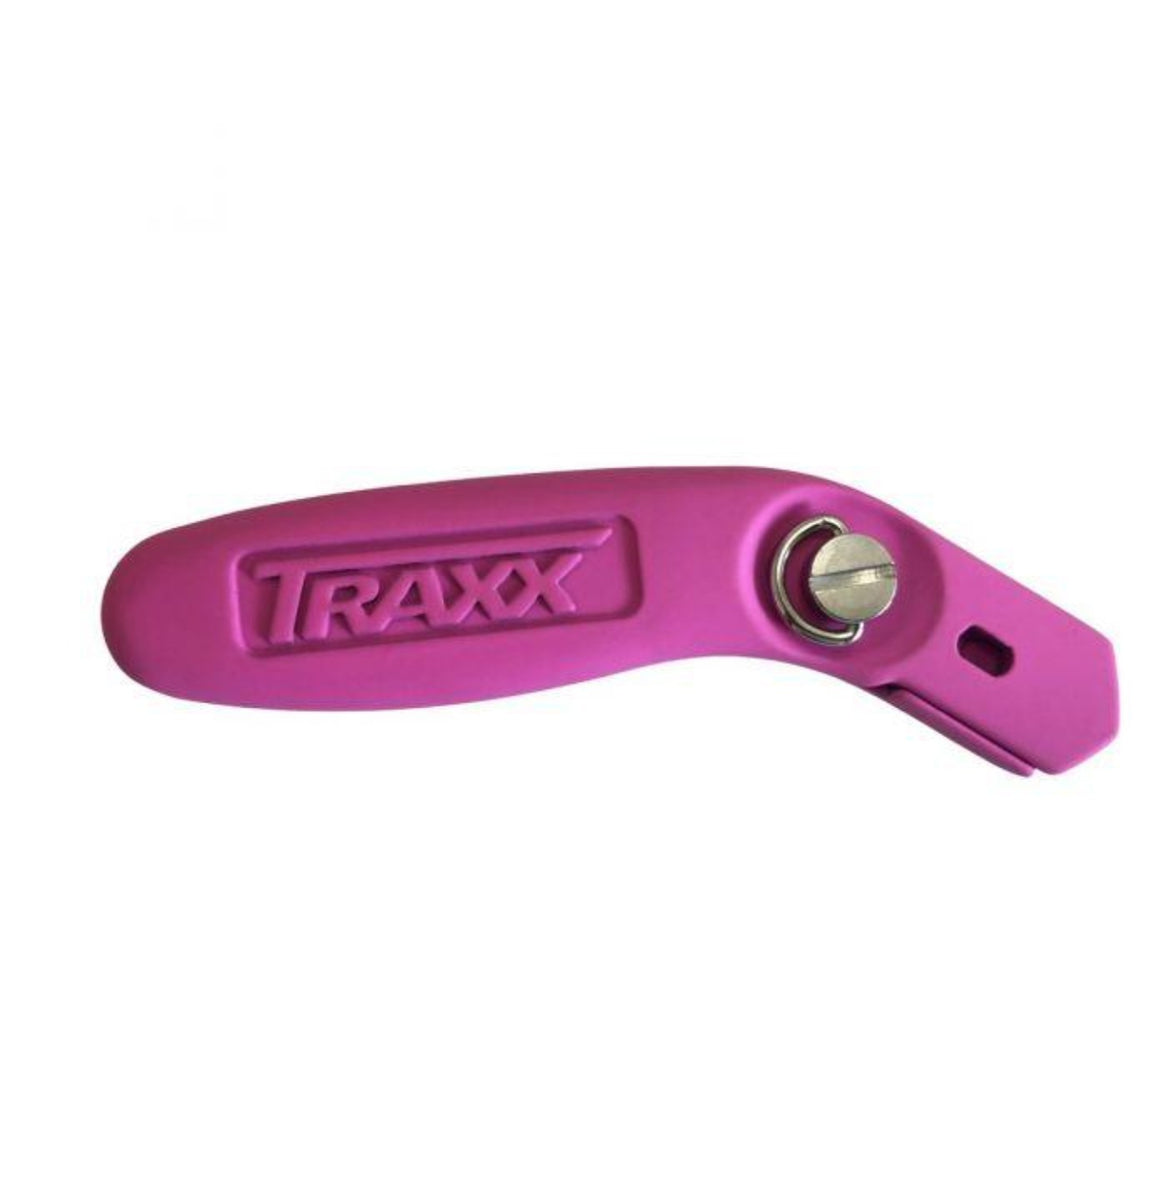 Traxx TTX-6700 Slotted Carpet Knife